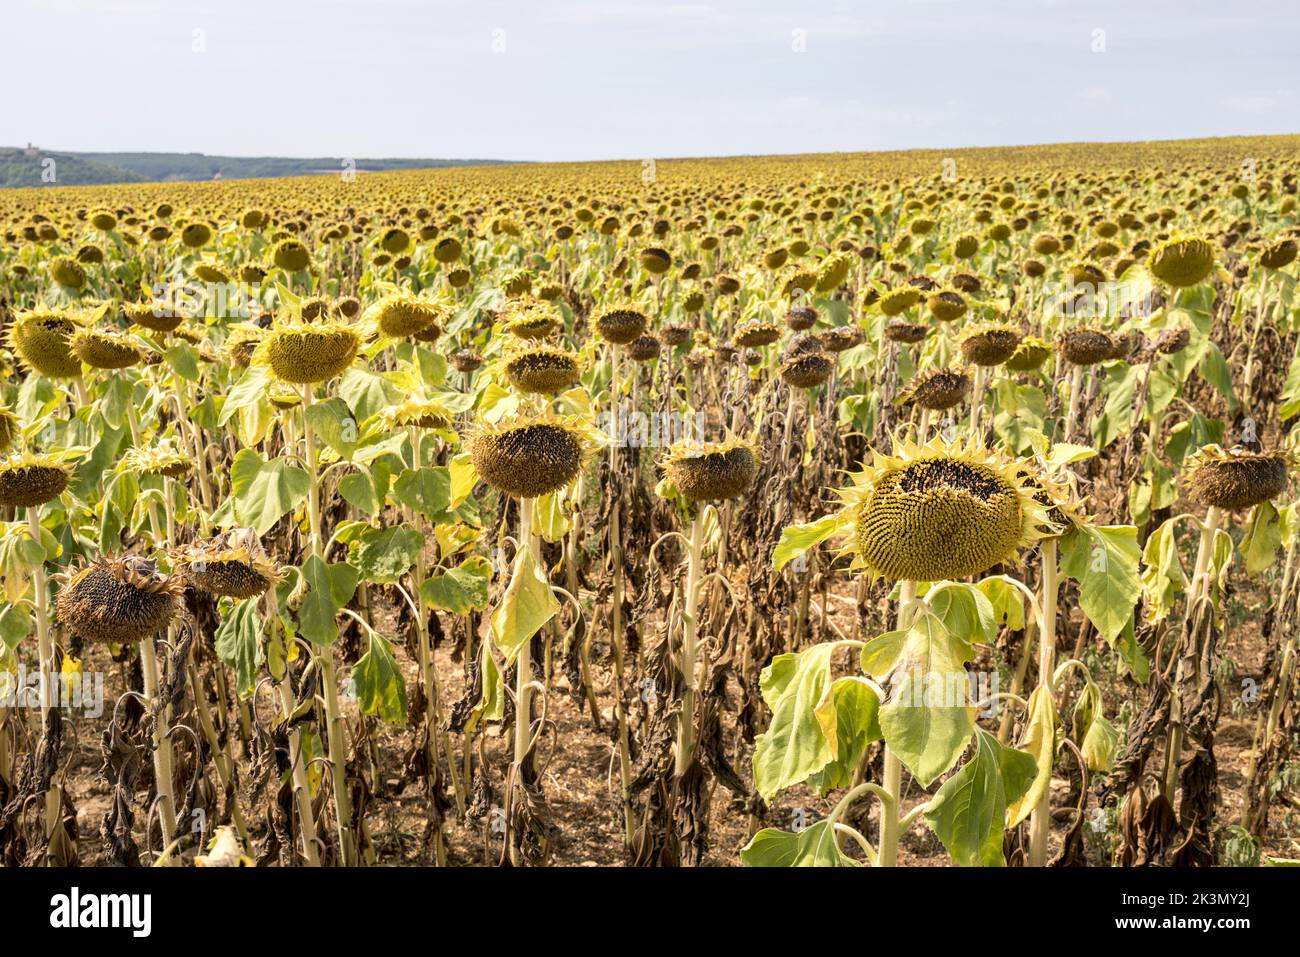 Sunflower crop ready for harvesting seeds, France Stock Photo